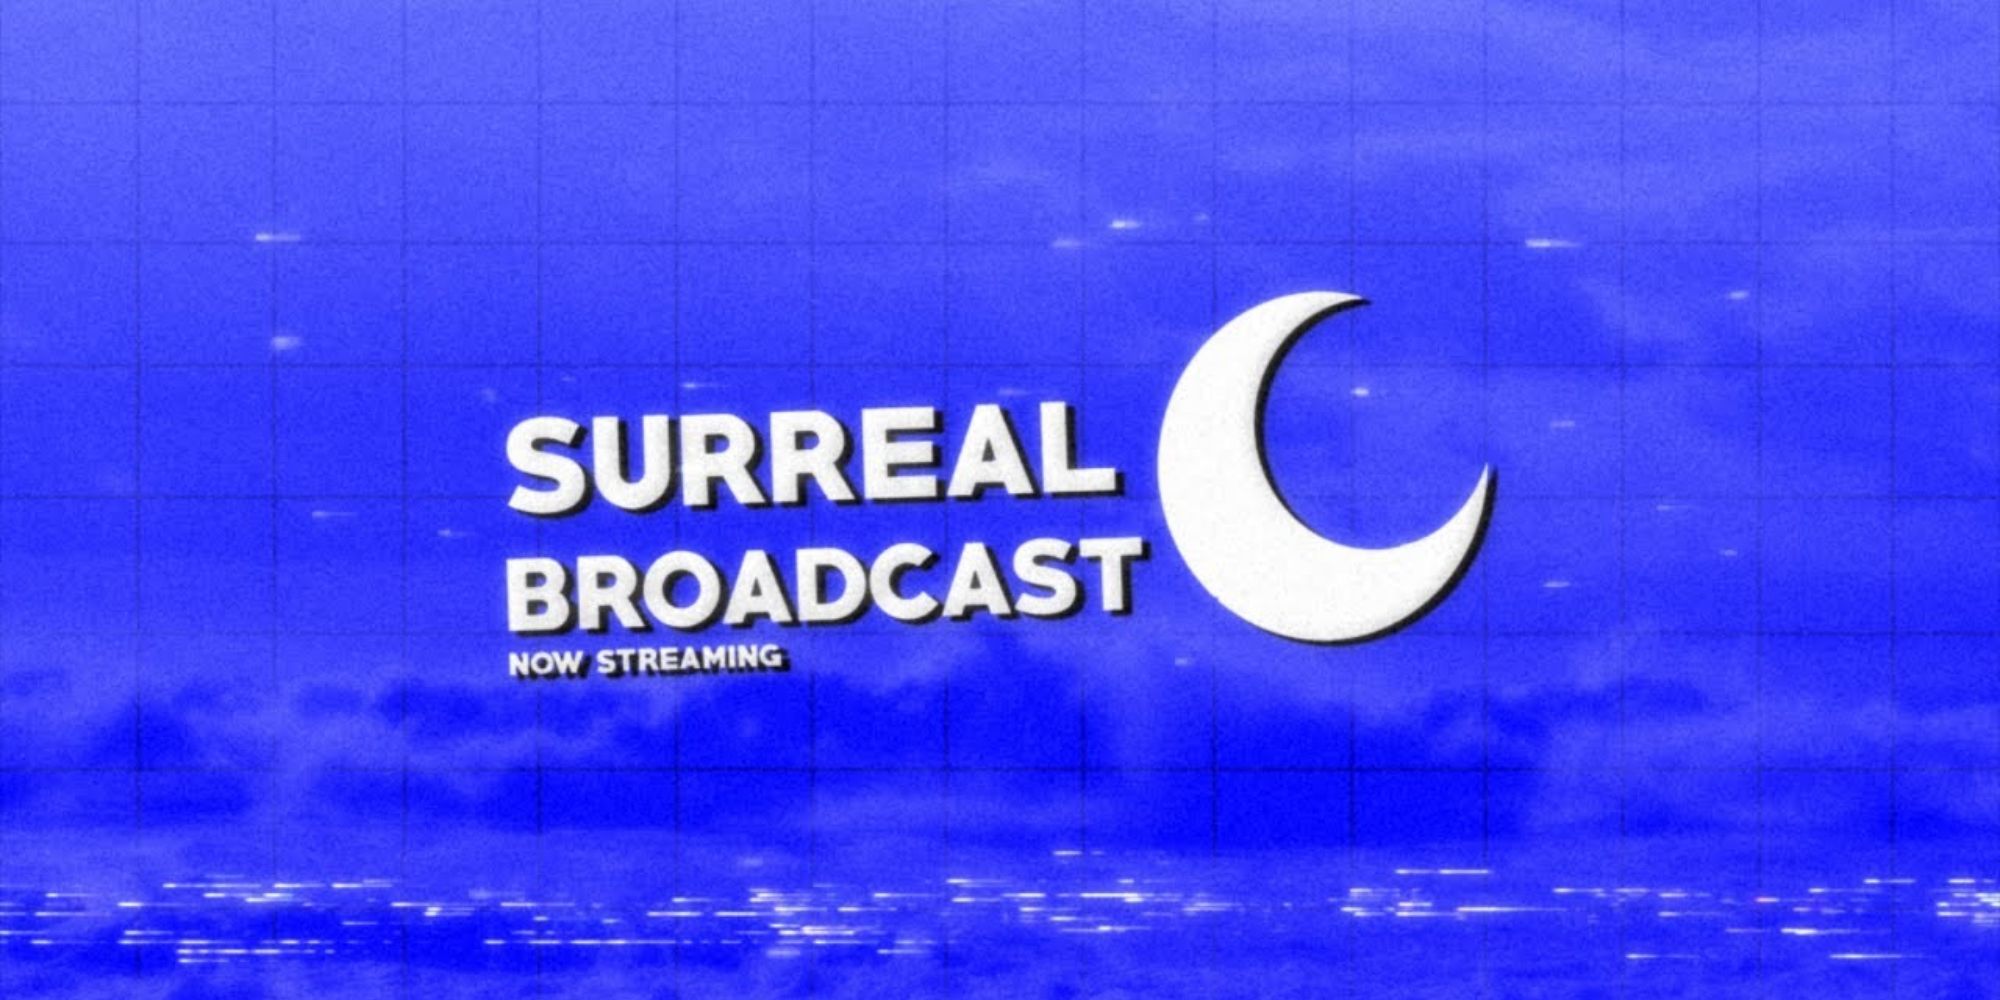 The logo for Surreal Broadcast.